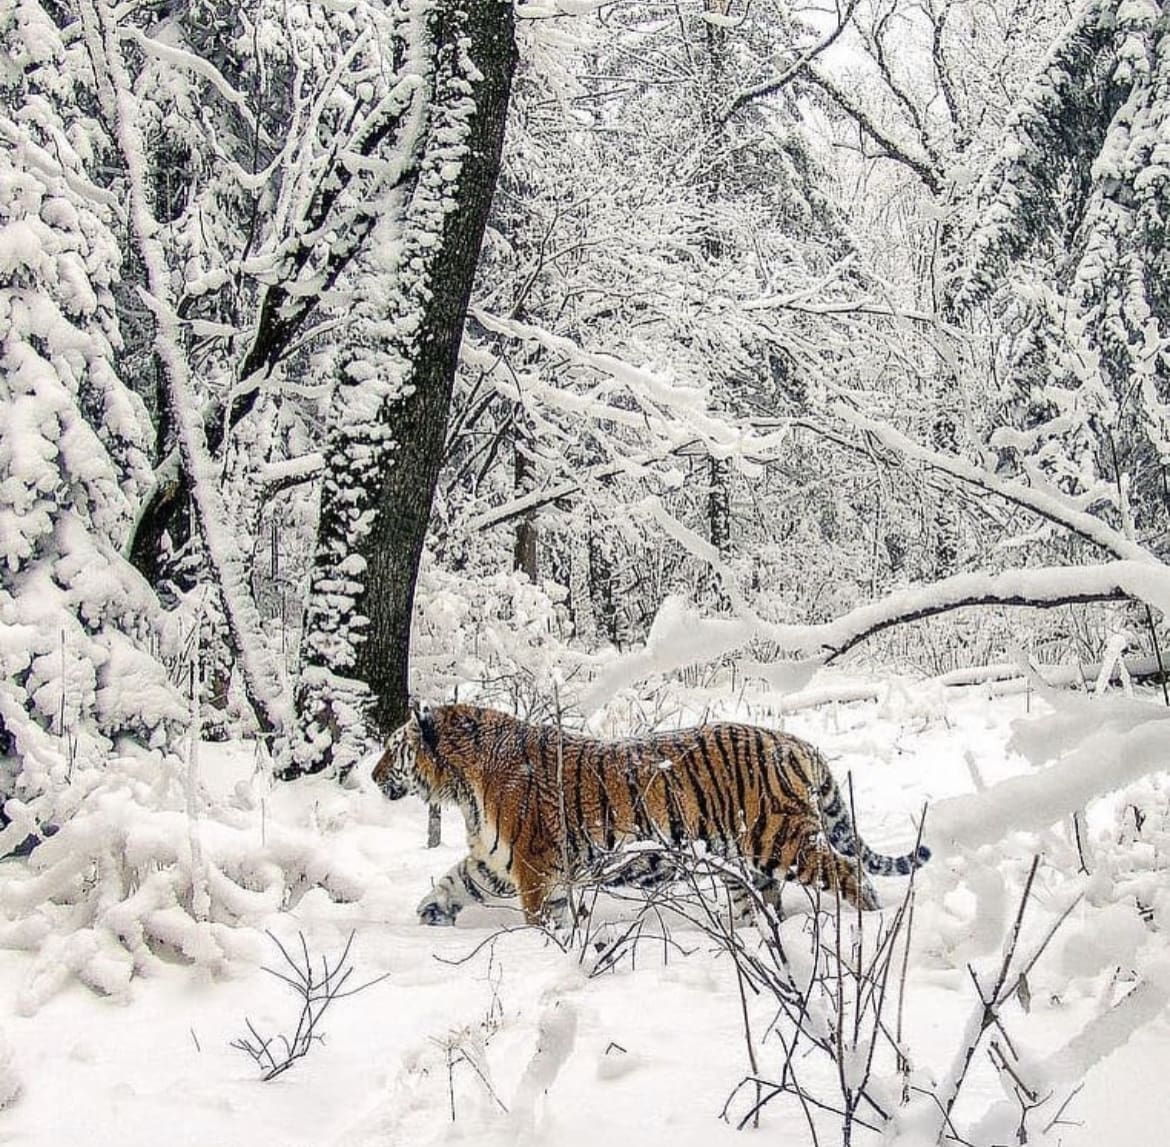 Predators lurk in the snow covered forests of Russia